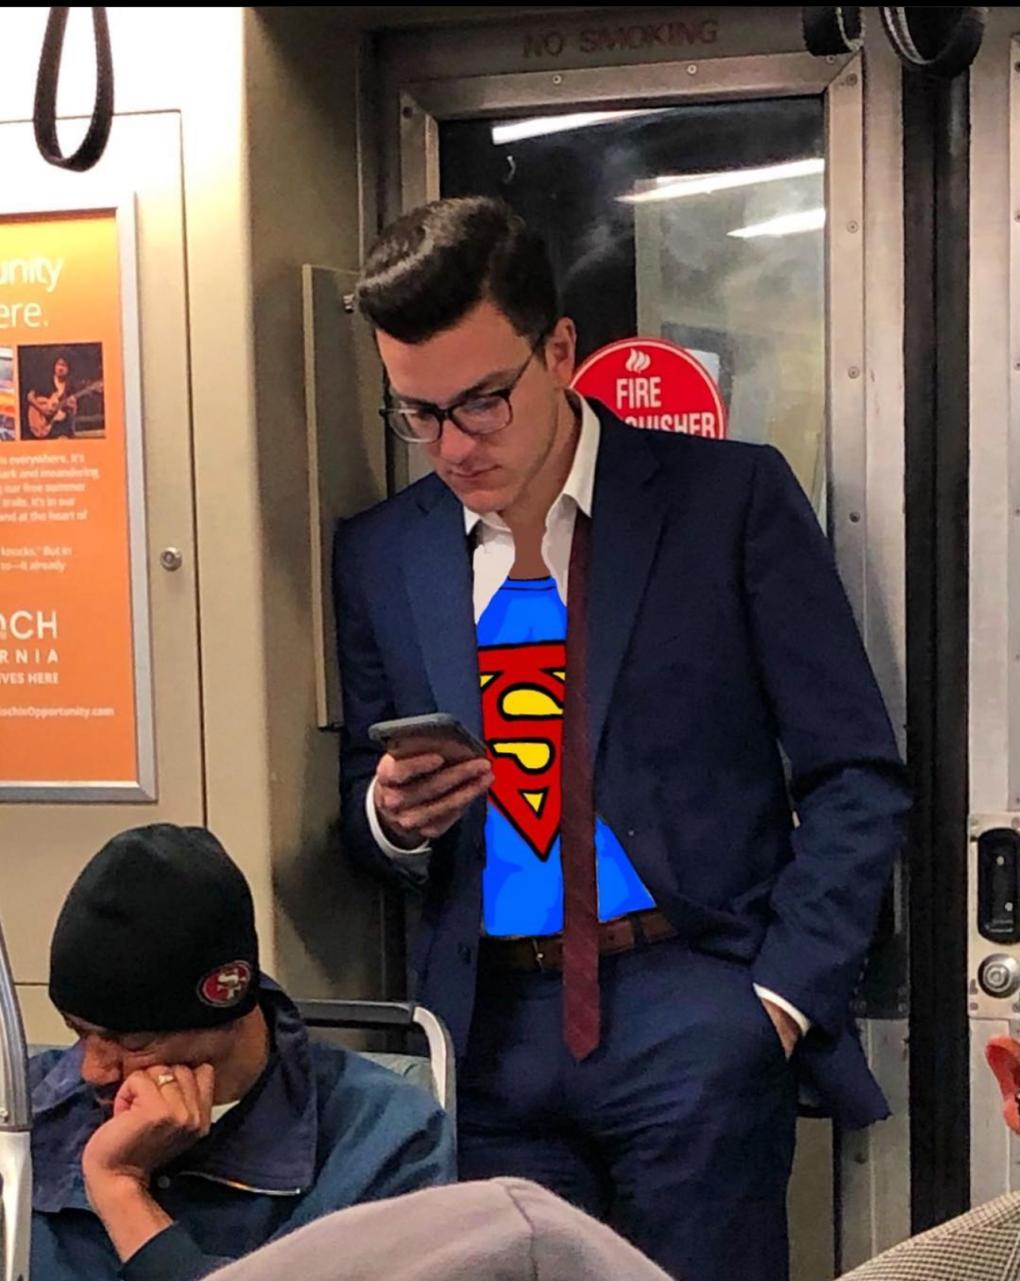 A person dressed in a suit, with a Superman logo humorously edited onto their shirt, is intently looking at their smartphone while riding a subway train, surrounded by other passengers.